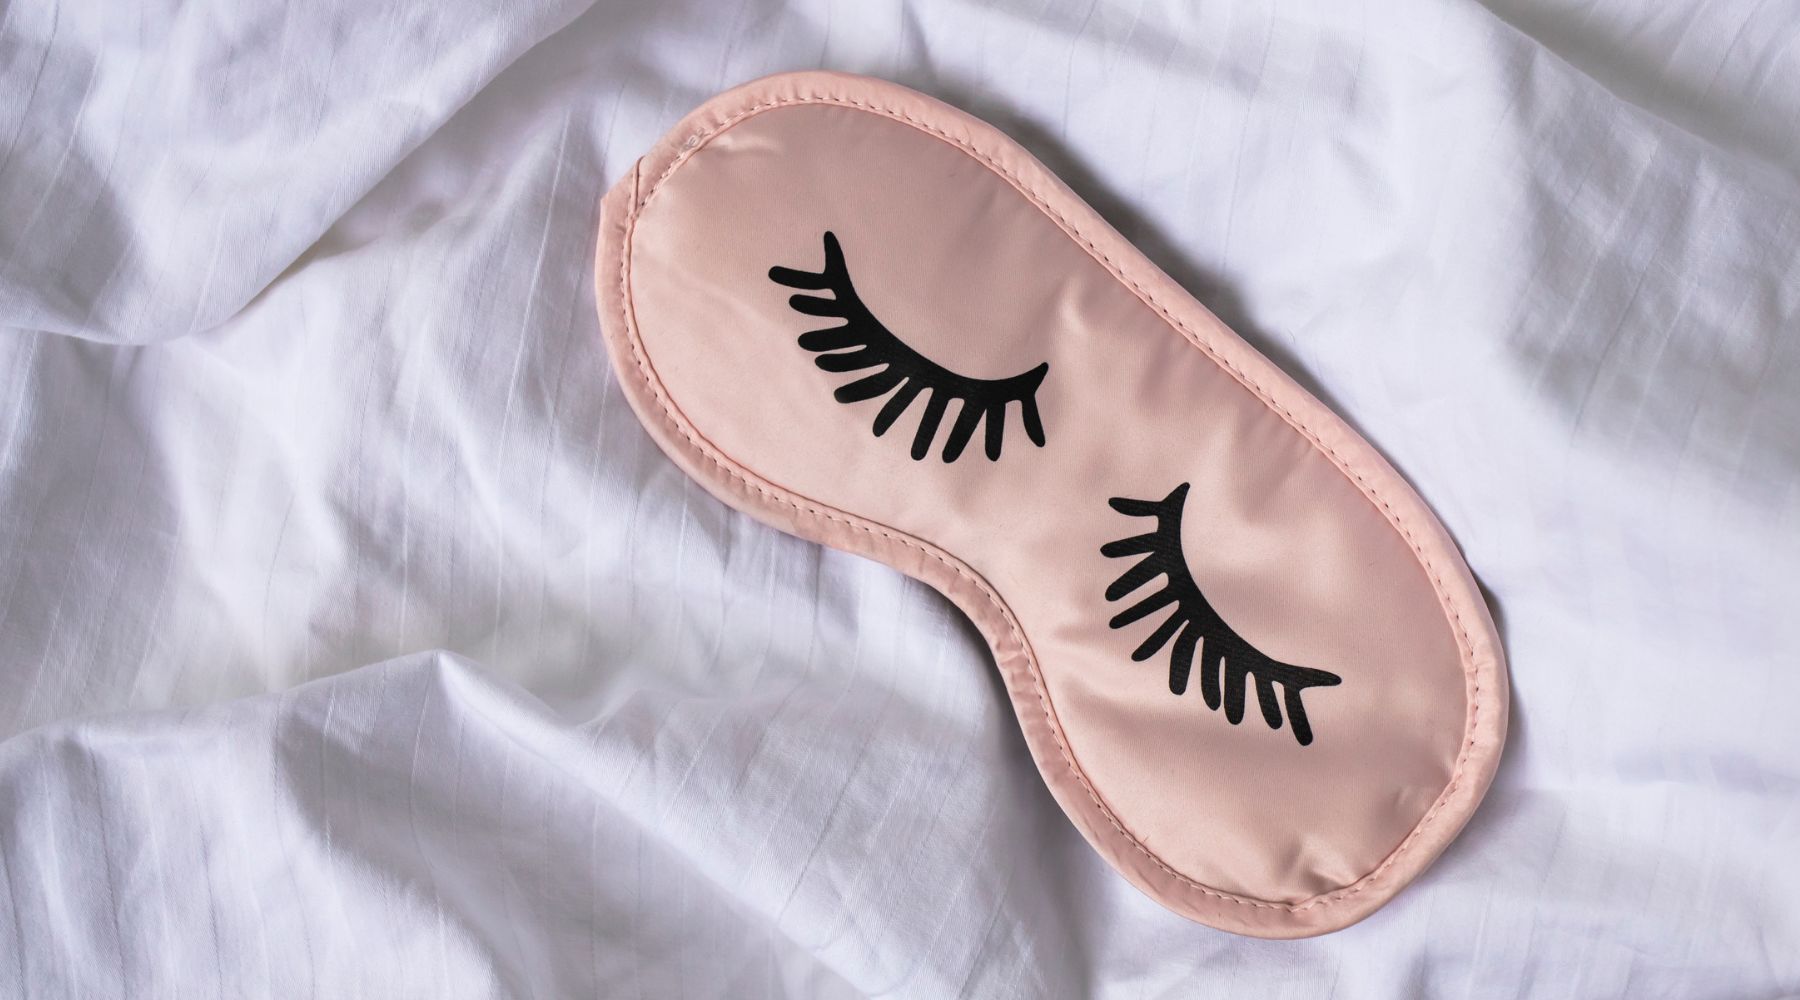 The Benefits of Eye Masks for Sleep: How to Improve Sleep Quality, Reduce Insomnia, and More